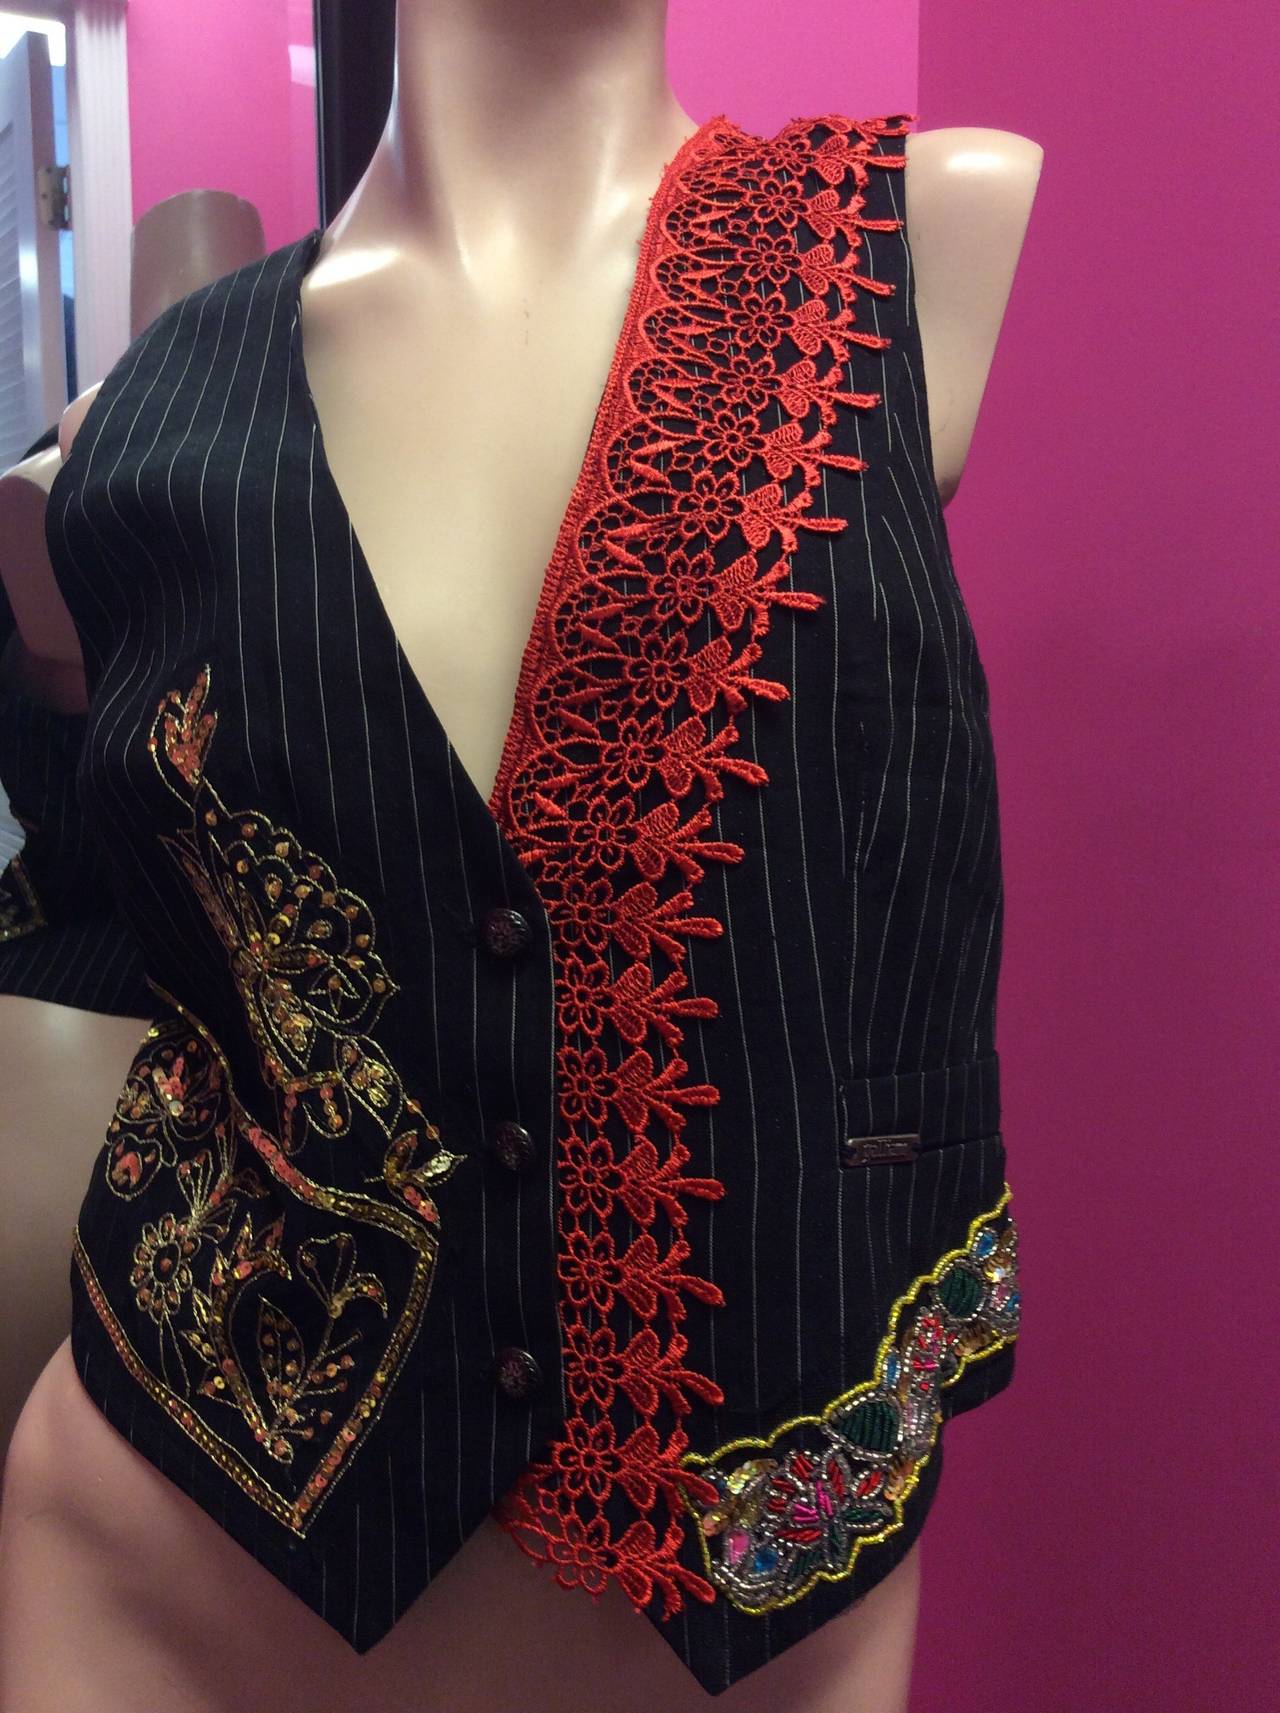 This is a rare John Galliano black and white pinstripe vest.  It has beautiful red embroidery on front left and gold sequins floral pattern on right. The back has Lasage embroidery and sequins forming a fun array of hearts and floral pattern. 
Silk